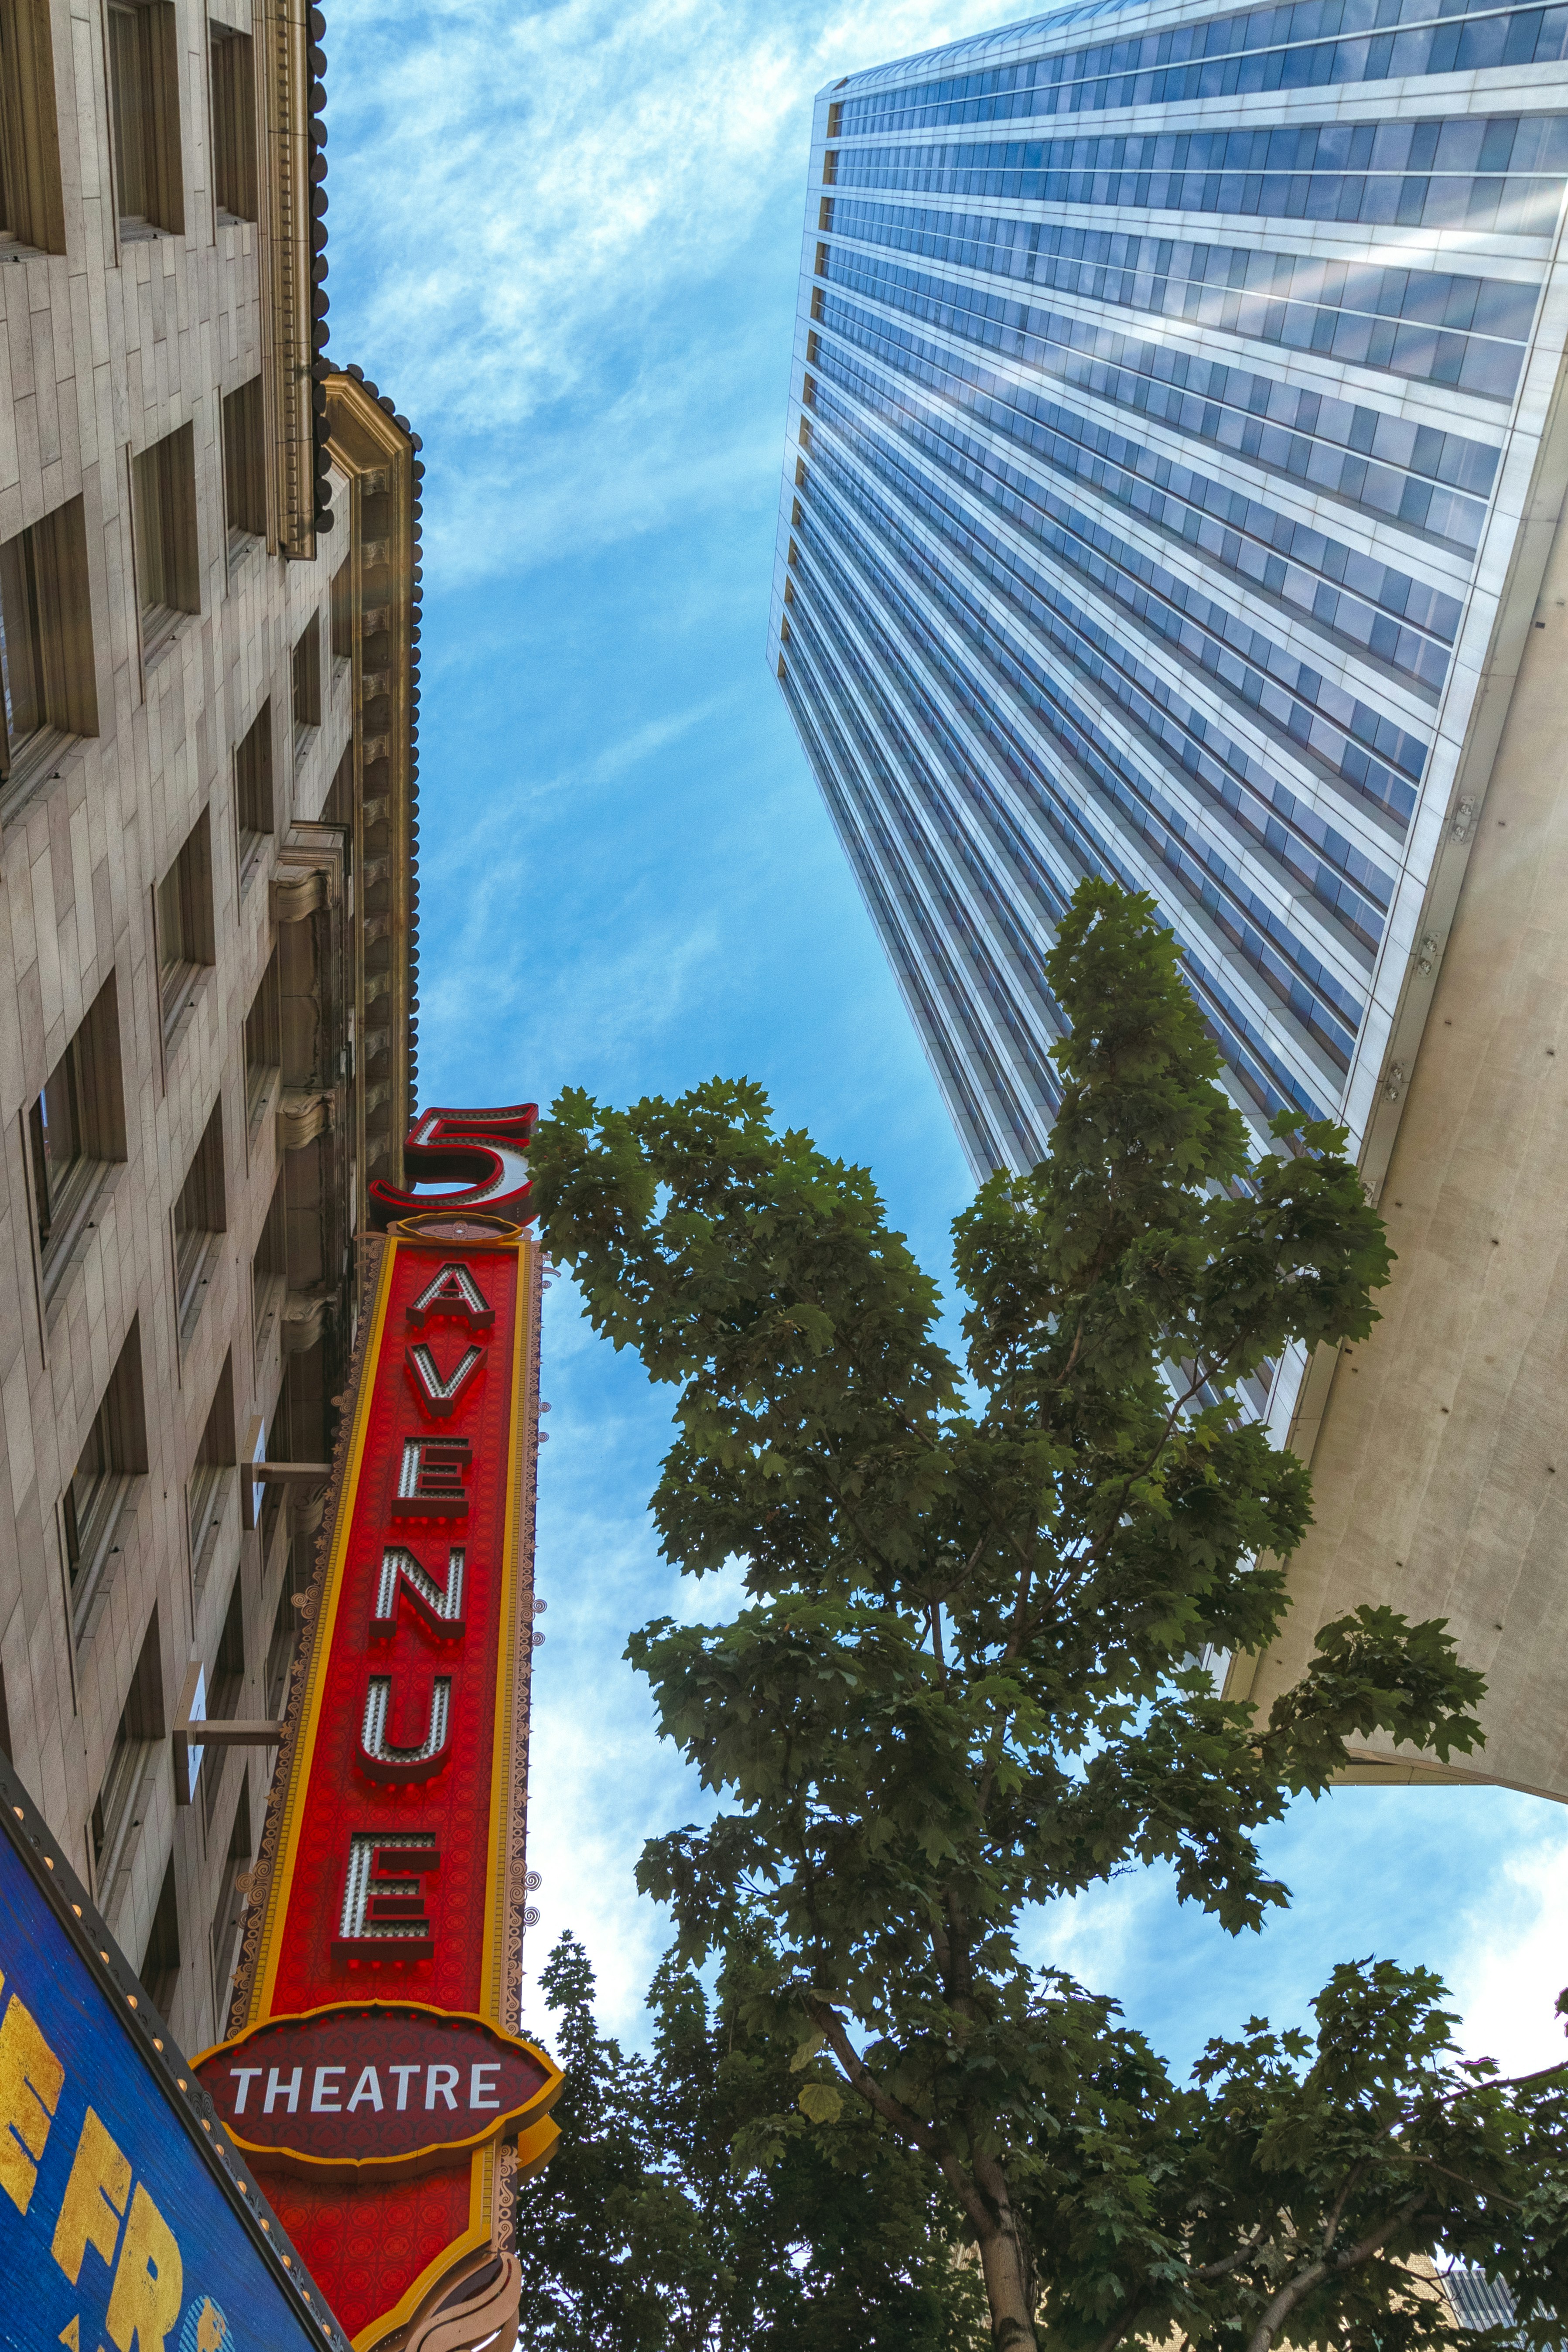 Looking up at the red sign outside the 5th Avenue Theatre and the blue sky above